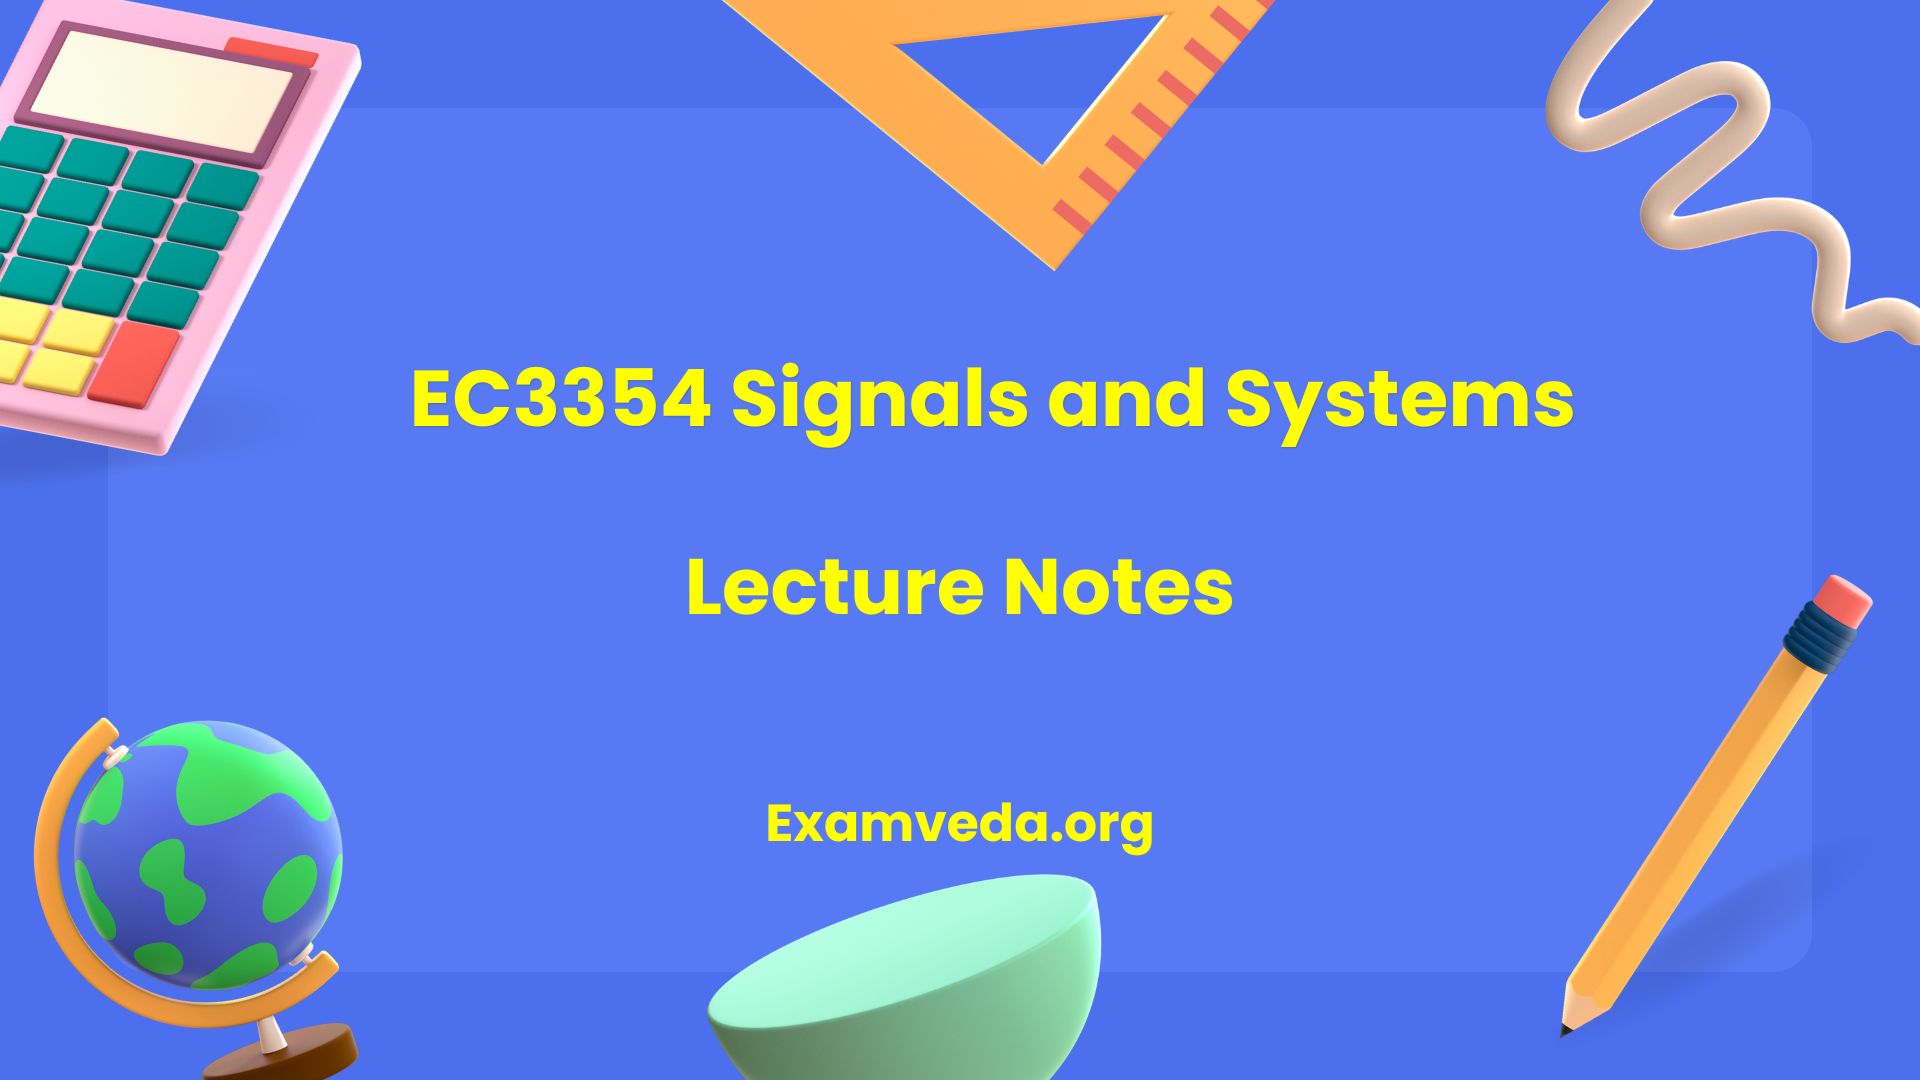 EC3354 Signals and Systems Lecture Notes